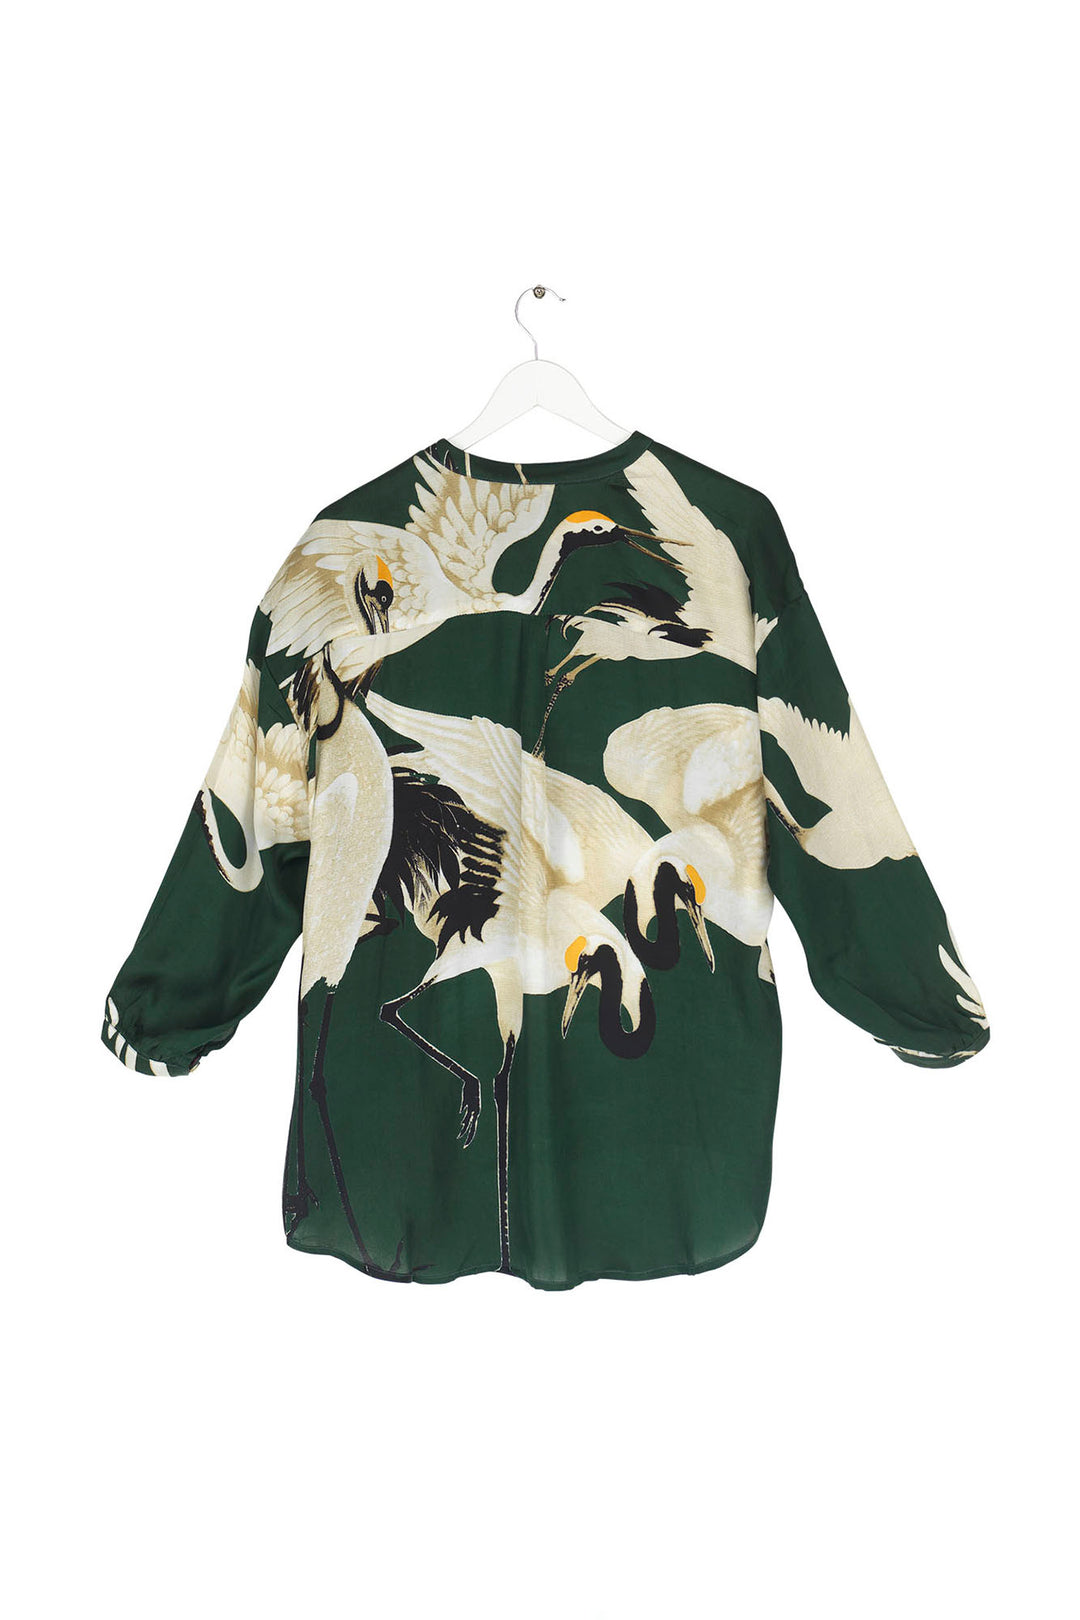 ladies long sleeve satin shirt green background with stork bird print by One Hundred Stars